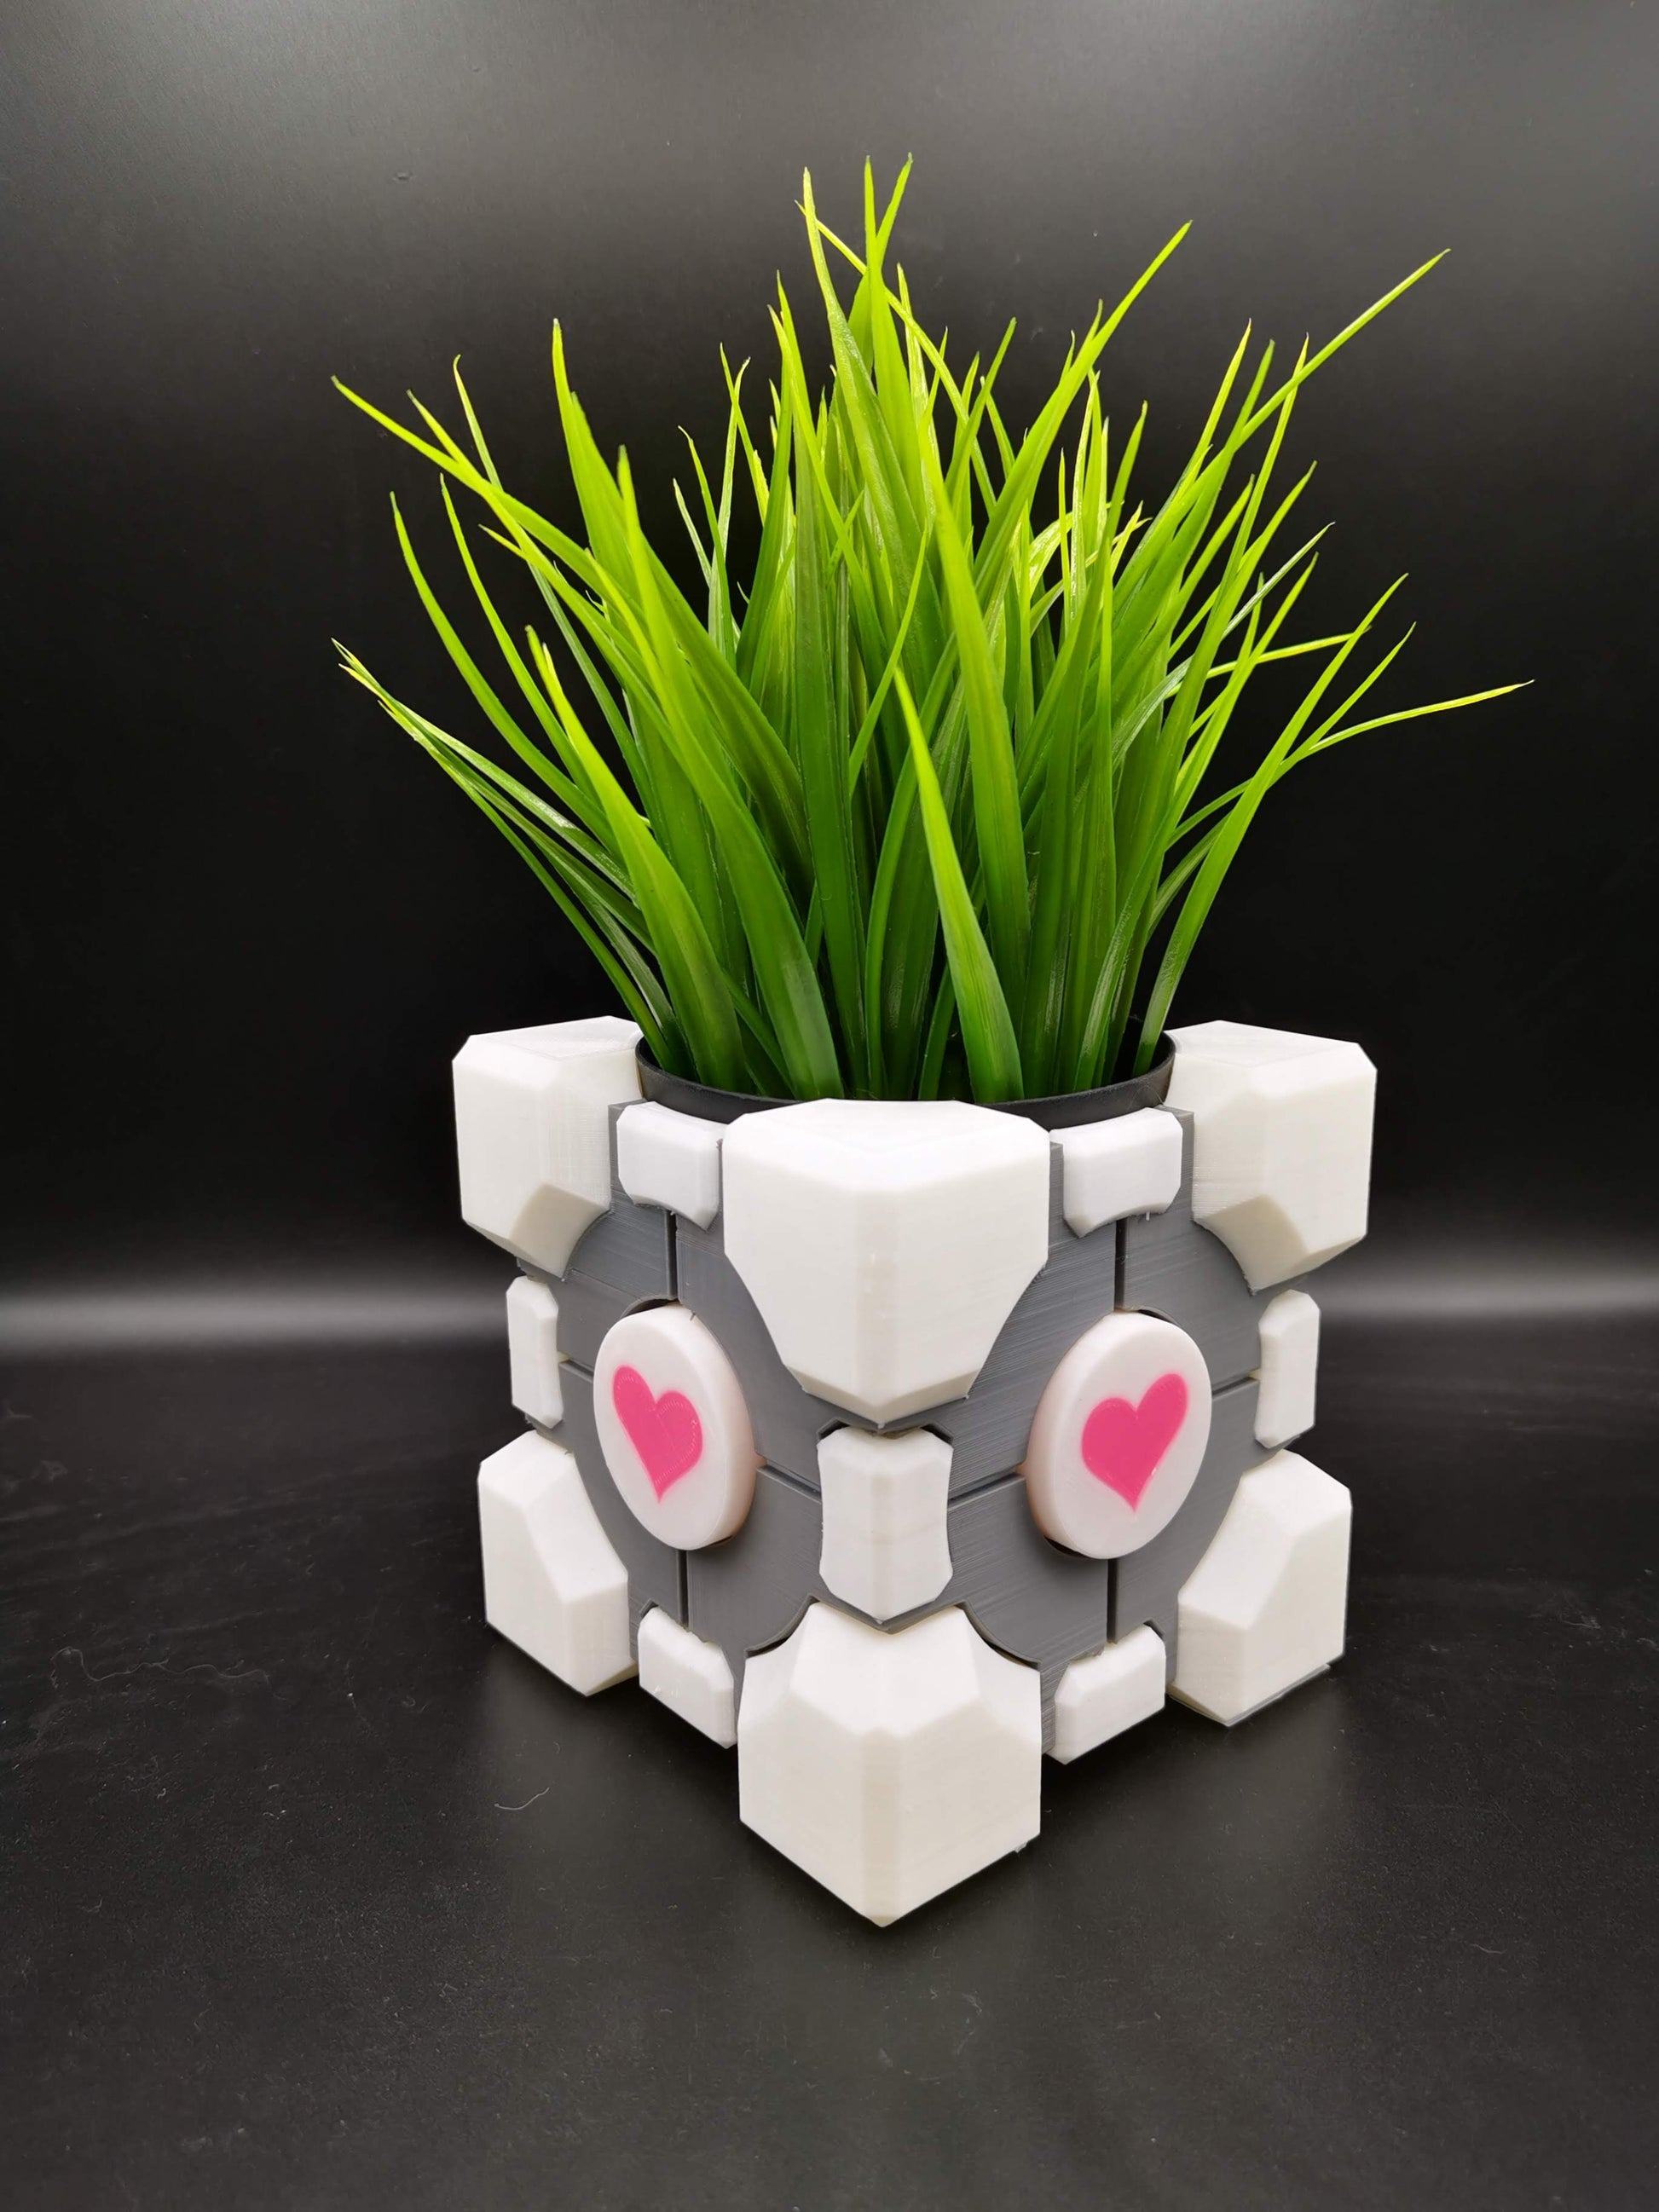 Companion Cube Portal planter with plant from angle